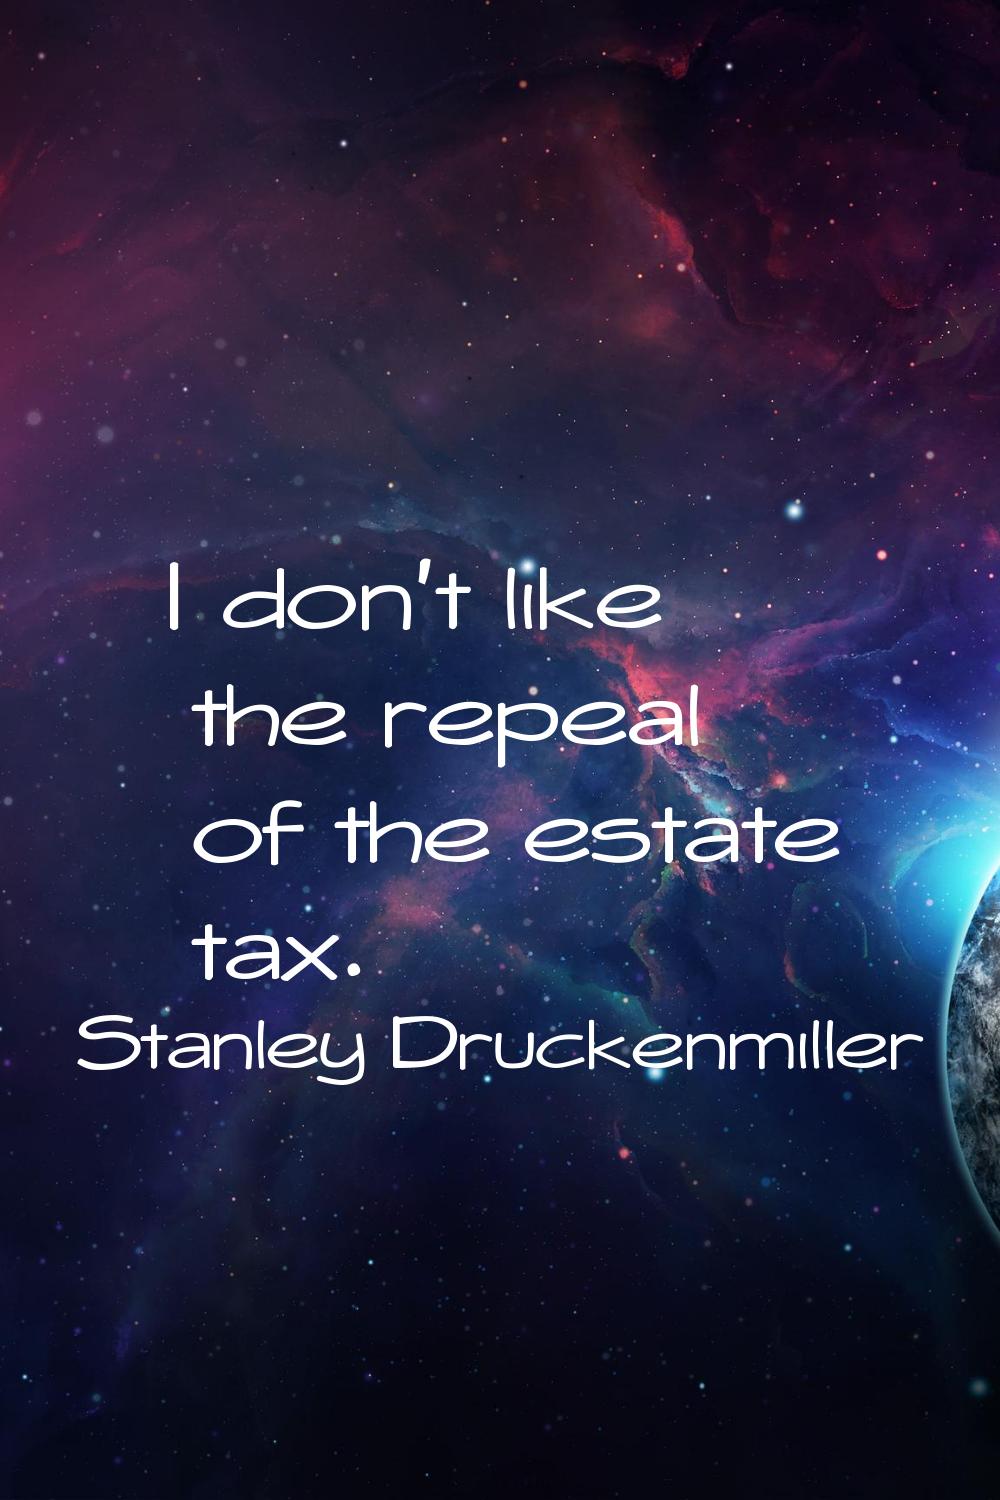 I don't like the repeal of the estate tax.